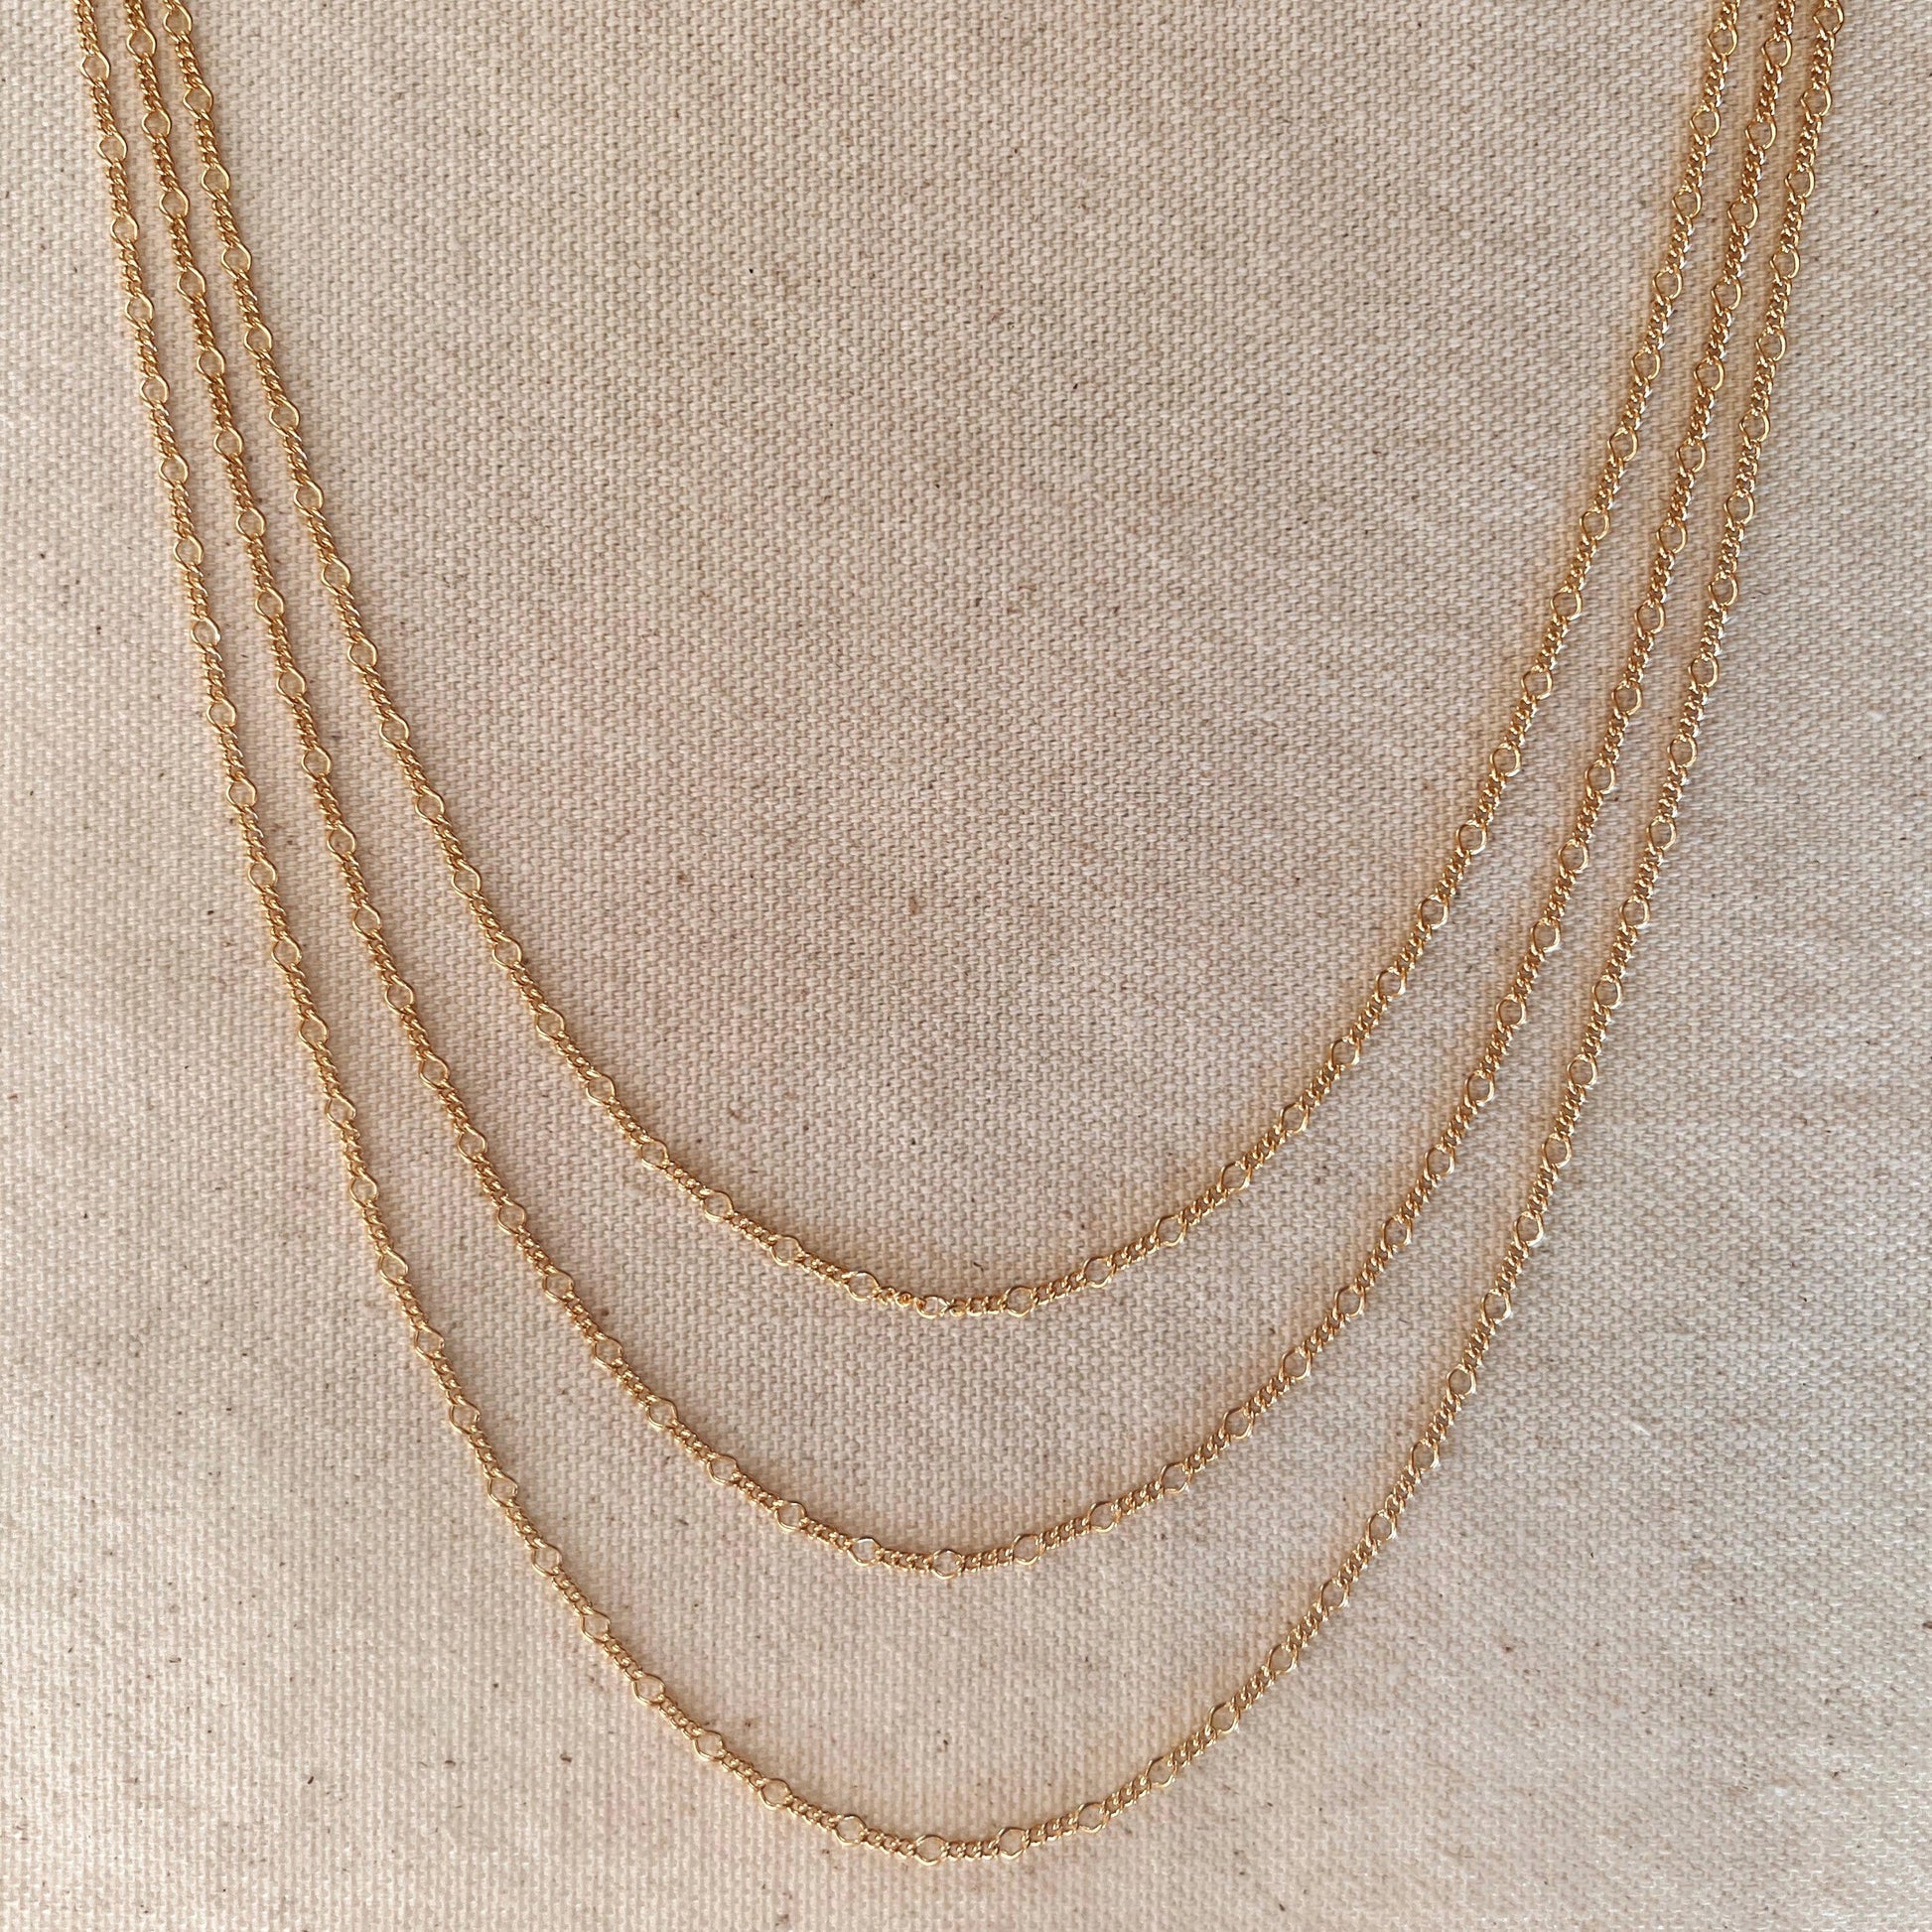 GoldFi 18k Gold Filled Chain Rounded Figaro Style